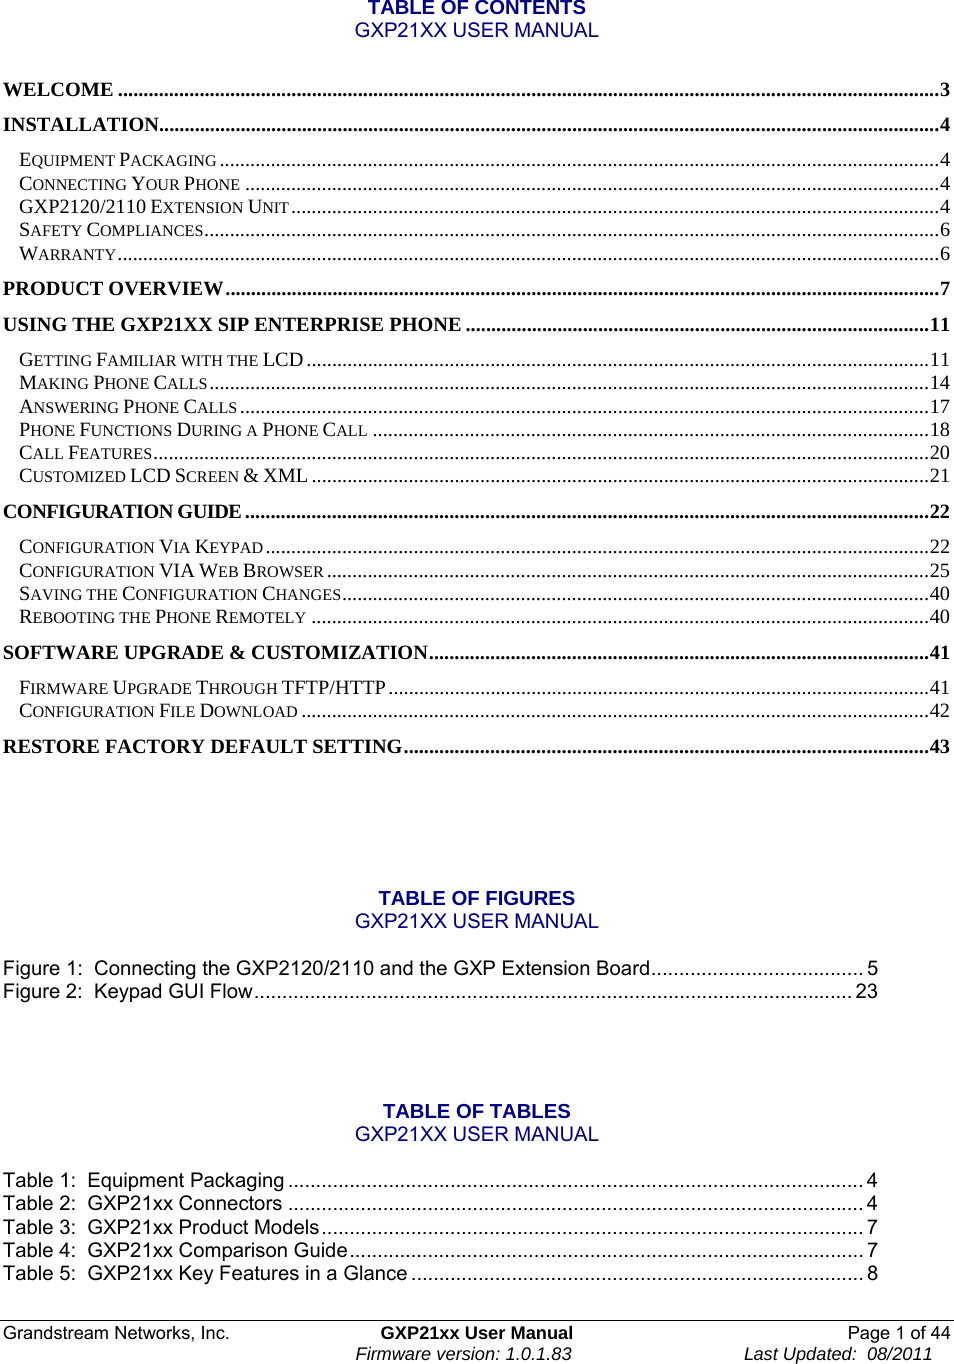 Grandstream Networks, Inc.  GXP21xx User Manual  Page 1 of 44                                                                    Firmware version: 1.0.1.83                                  Last Updated:  08/2011 TABLE OF CONTENTS GXP21XX USER MANUAL  WELCOME .................................................................................................................................................................3INSTALLATION.........................................................................................................................................................4EQUIPMENT PACKAGING .............................................................................................................................................4CONNECTING YOUR PHONE ........................................................................................................................................4GXP2120/2110 EXTENSION UNIT...............................................................................................................................4SAFETY COMPLIANCES................................................................................................................................................6WARRANTY.................................................................................................................................................................6PRODUCT OVERVIEW............................................................................................................................................7USING THE GXP21XX SIP ENTERPRISE PHONE ...........................................................................................11GETTING FAMILIAR WITH THE LCD..........................................................................................................................11MAKING PHONE CALLS.............................................................................................................................................14ANSWERING PHONE CALLS .......................................................................................................................................17PHONE FUNCTIONS DURING A PHONE CALL .............................................................................................................18CALL FEATURES........................................................................................................................................................20CUSTOMIZED LCD SCREEN &amp; XML .........................................................................................................................21CONFIGURATION GUIDE......................................................................................................................................22CONFIGURATION VIA KEYPAD..................................................................................................................................22CONFIGURATION VIA WEB BROWSER ......................................................................................................................25SAVING THE CONFIGURATION CHANGES...................................................................................................................40REBOOTING THE PHONE REMOTELY .........................................................................................................................40SOFTWARE UPGRADE &amp; CUSTOMIZATION..................................................................................................41FIRMWARE UPGRADE THROUGH TFTP/HTTP..........................................................................................................41CONFIGURATION FILE DOWNLOAD ...........................................................................................................................42RESTORE FACTORY DEFAULT SETTING.......................................................................................................43      TABLE OF FIGURES GXP21XX USER MANUAL  Figure 1:  Connecting the GXP2120/2110 and the GXP Extension Board...................................... 5Figure 2:  Keypad GUI Flow........................................................................................................... 23   TABLE OF TABLES GXP21XX USER MANUAL  Table 1:  Equipment Packaging ....................................................................................................... 4 Table 2:  GXP21xx Connectors ....................................................................................................... 4 Table 3:  GXP21xx Product Models................................................................................................. 7 Table 4:  GXP21xx Comparison Guide............................................................................................ 7Table 5:  GXP21xx Key Features in a Glance ................................................................................. 8